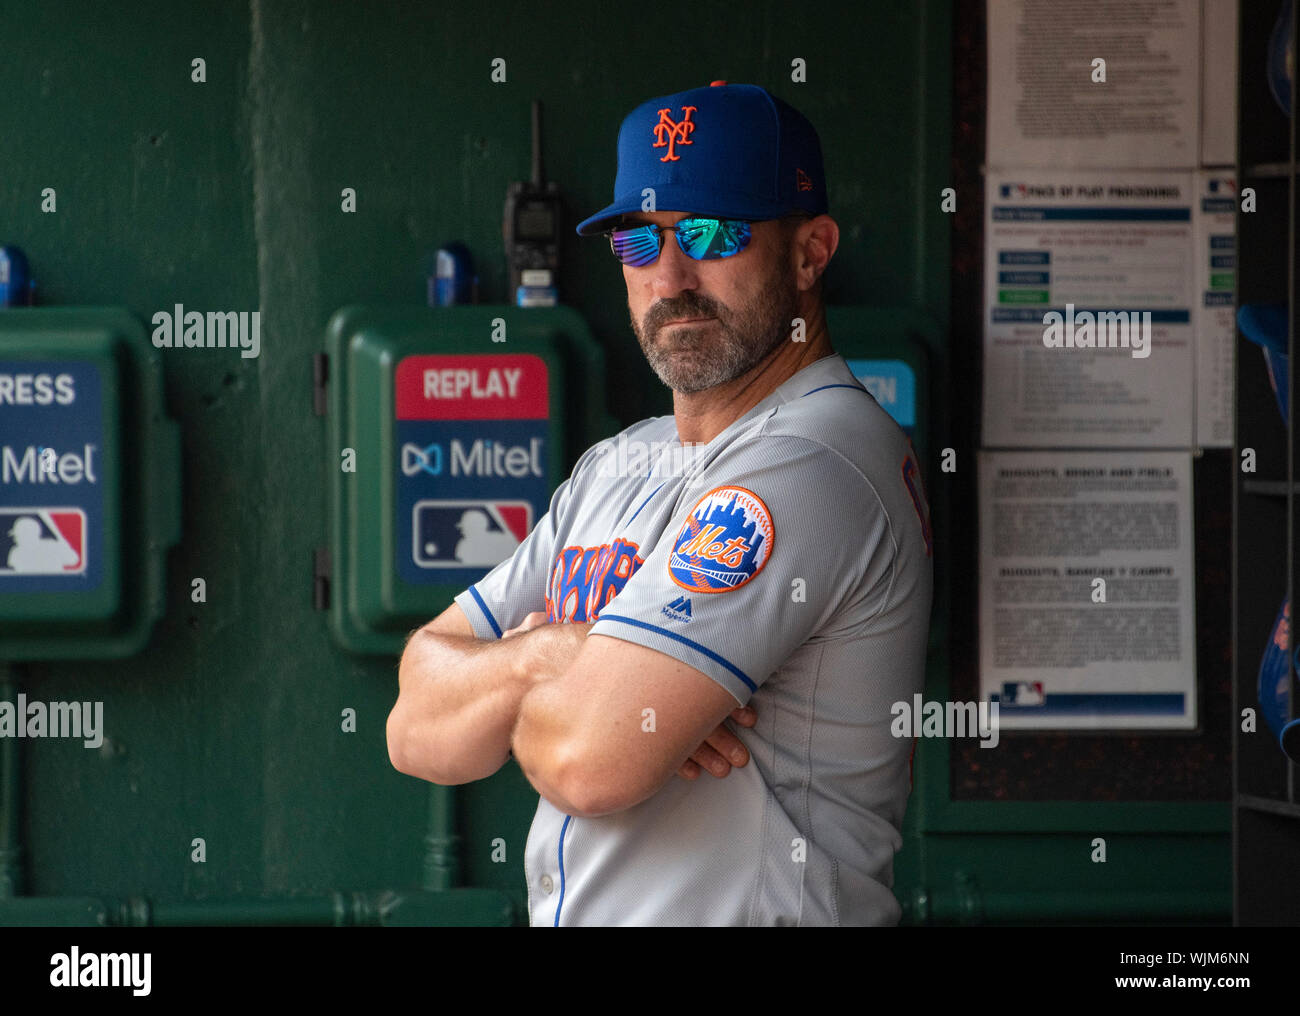 Washington, United States Of America. 02nd Sep, 2019. New York Mets manager Mickey Callaway (36) in the dugout prior to the game against the Washington Nationals at Nationals Park in Washington, DC on Monday, September 2, 2019.Credit: Ron Sachs/CNP (RESTRICTION: NO New York or New Jersey Newspapers or newspapers within a 75 mile radius of New York City) | usage worldwide Credit: dpa/Alamy Live News Stock Photo